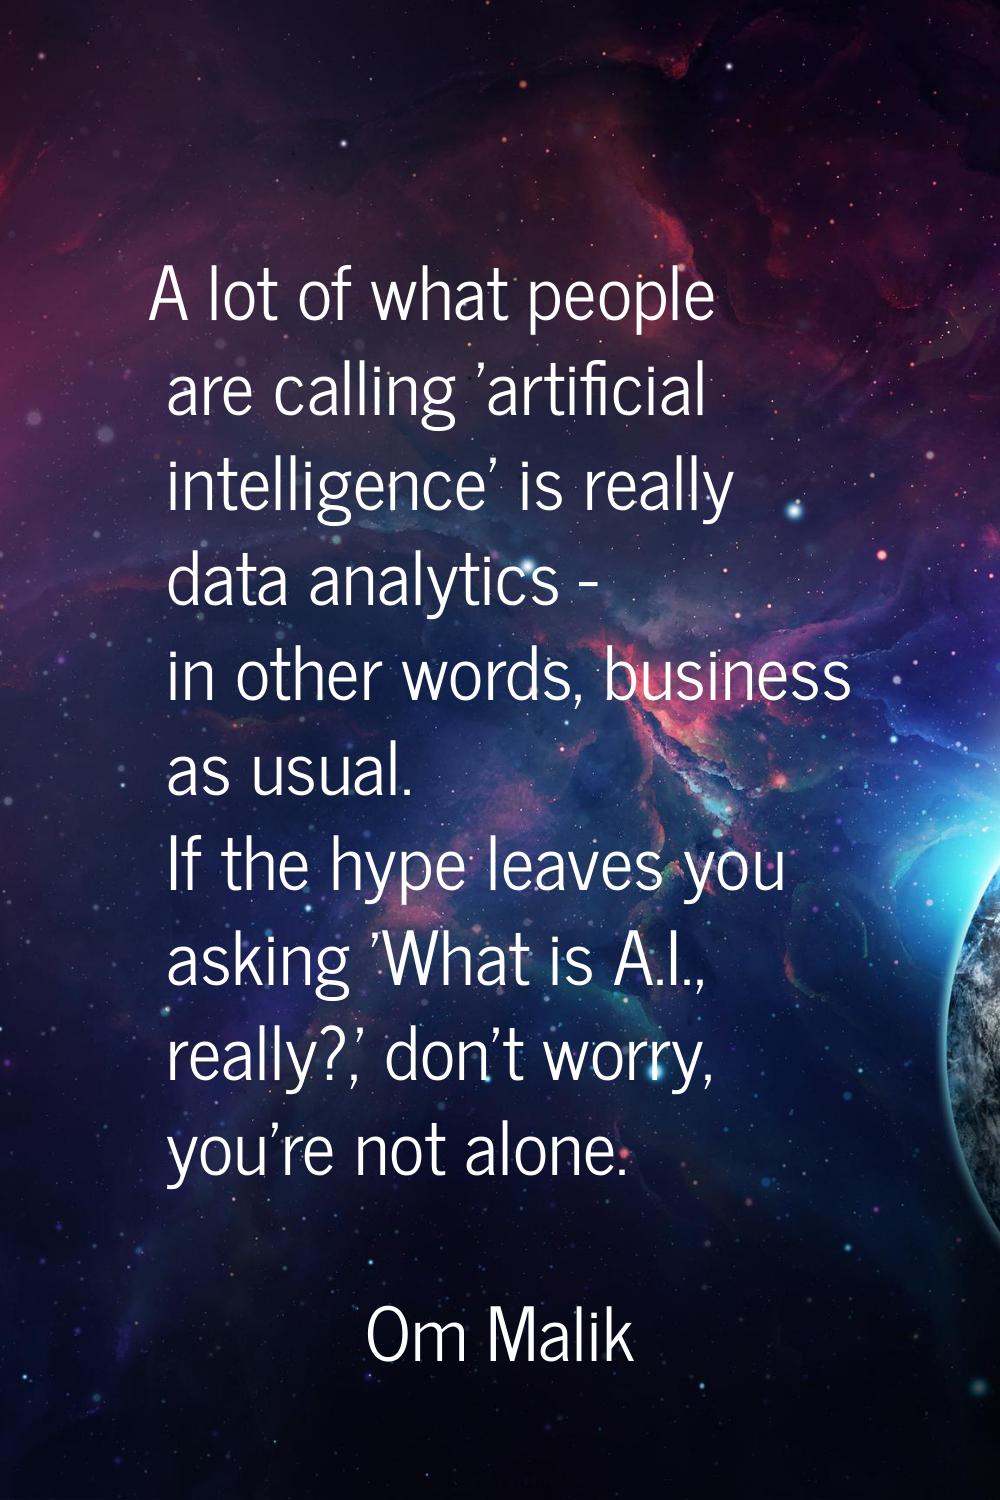 A lot of what people are calling 'artificial intelligence' is really data analytics - in other word